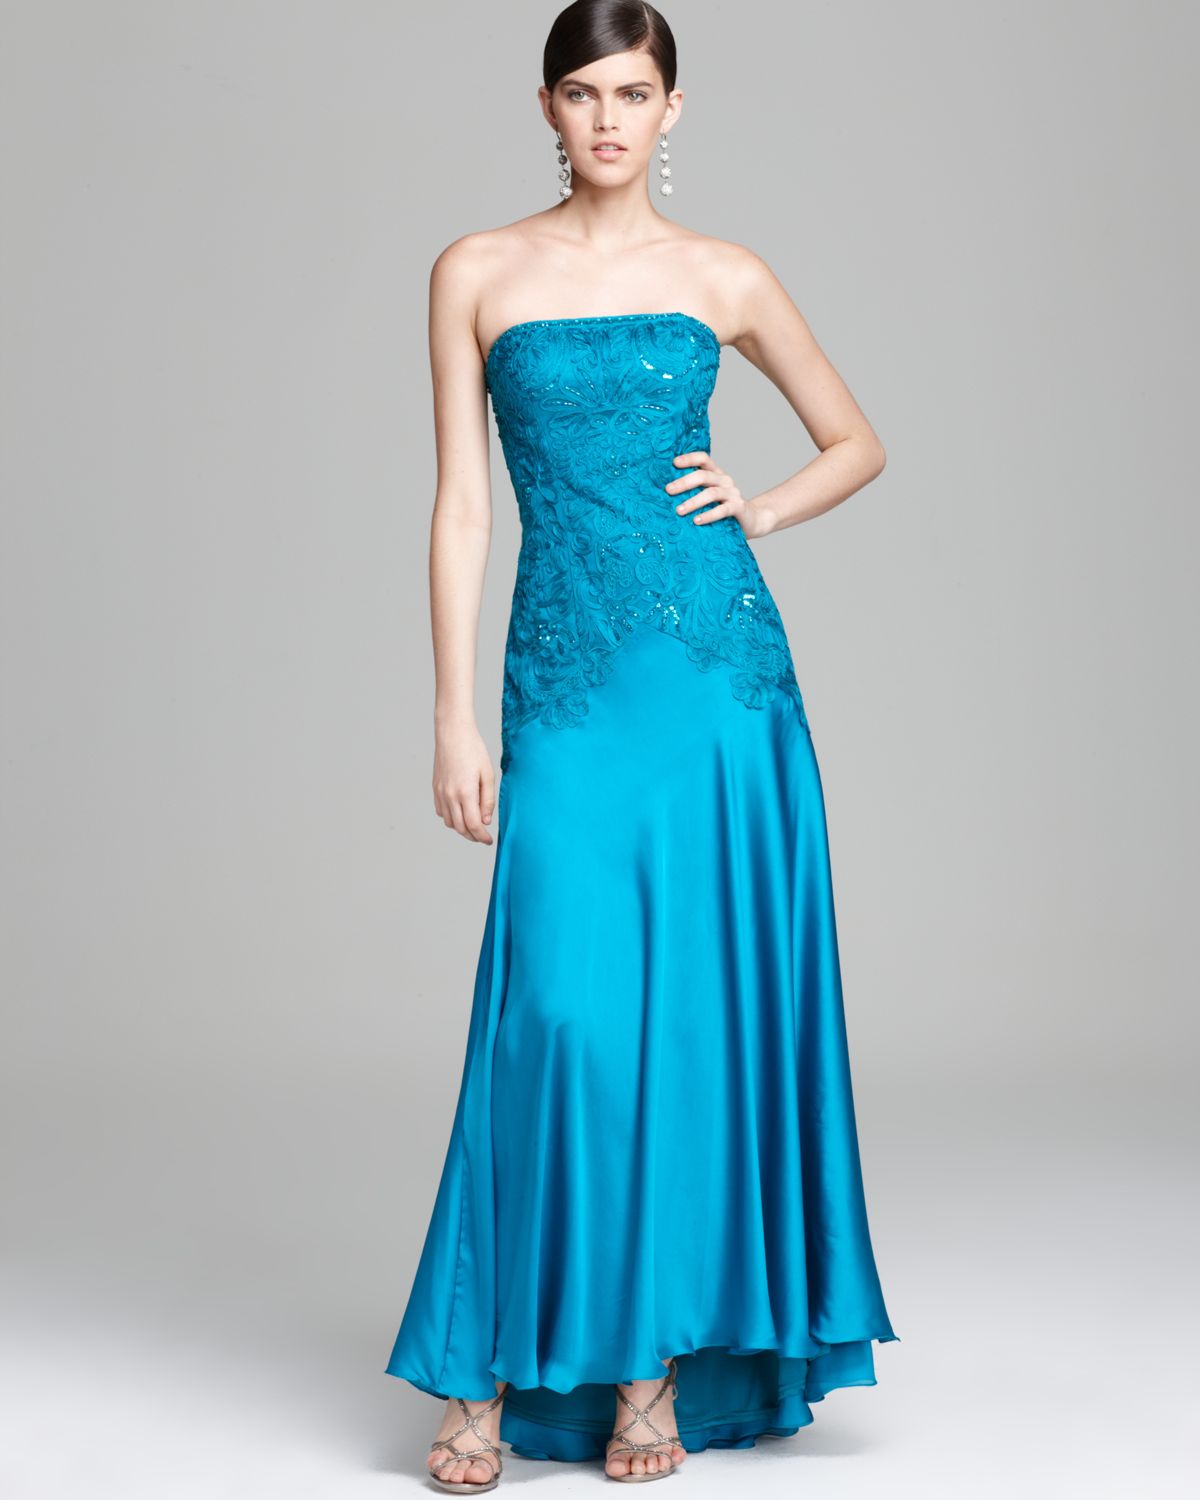 Lyst - Sue Wong Strapless Beaded Bodice Gown in Blue